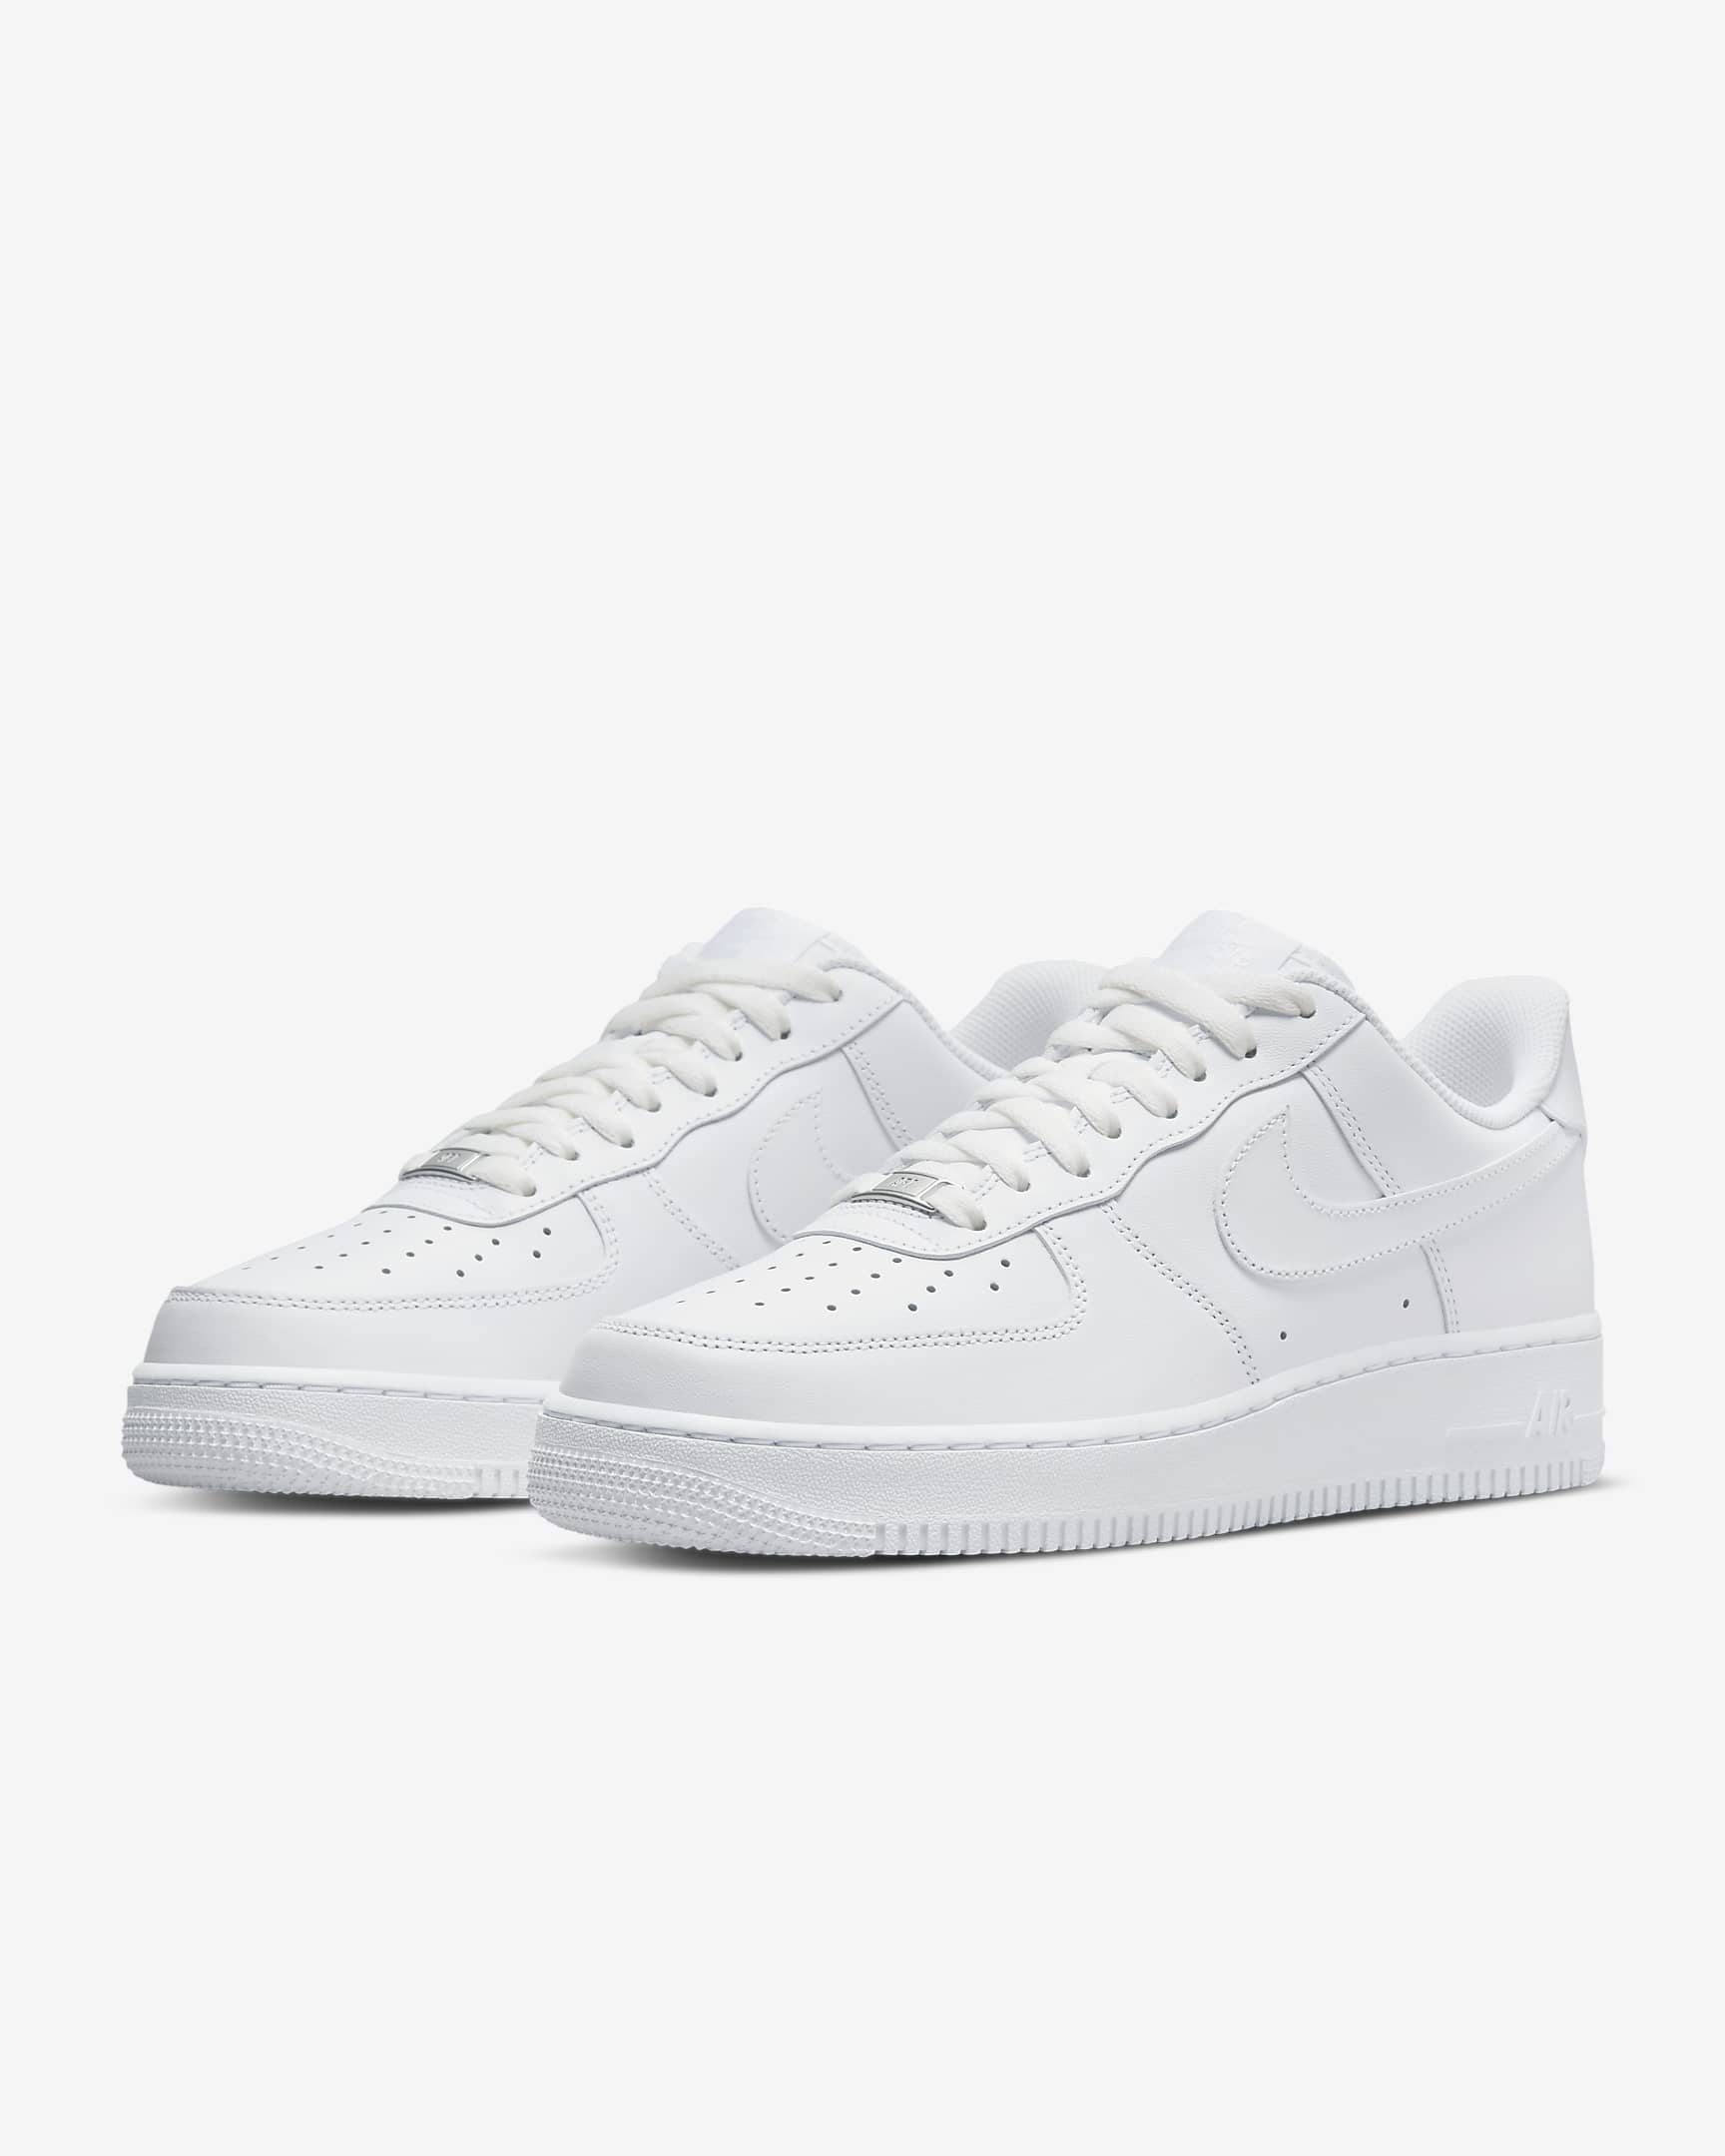 Nike Men's Air Force 1 '07 Sneaker (White) $49 + Free Shipping or Free Store Pickup at Nordstrom